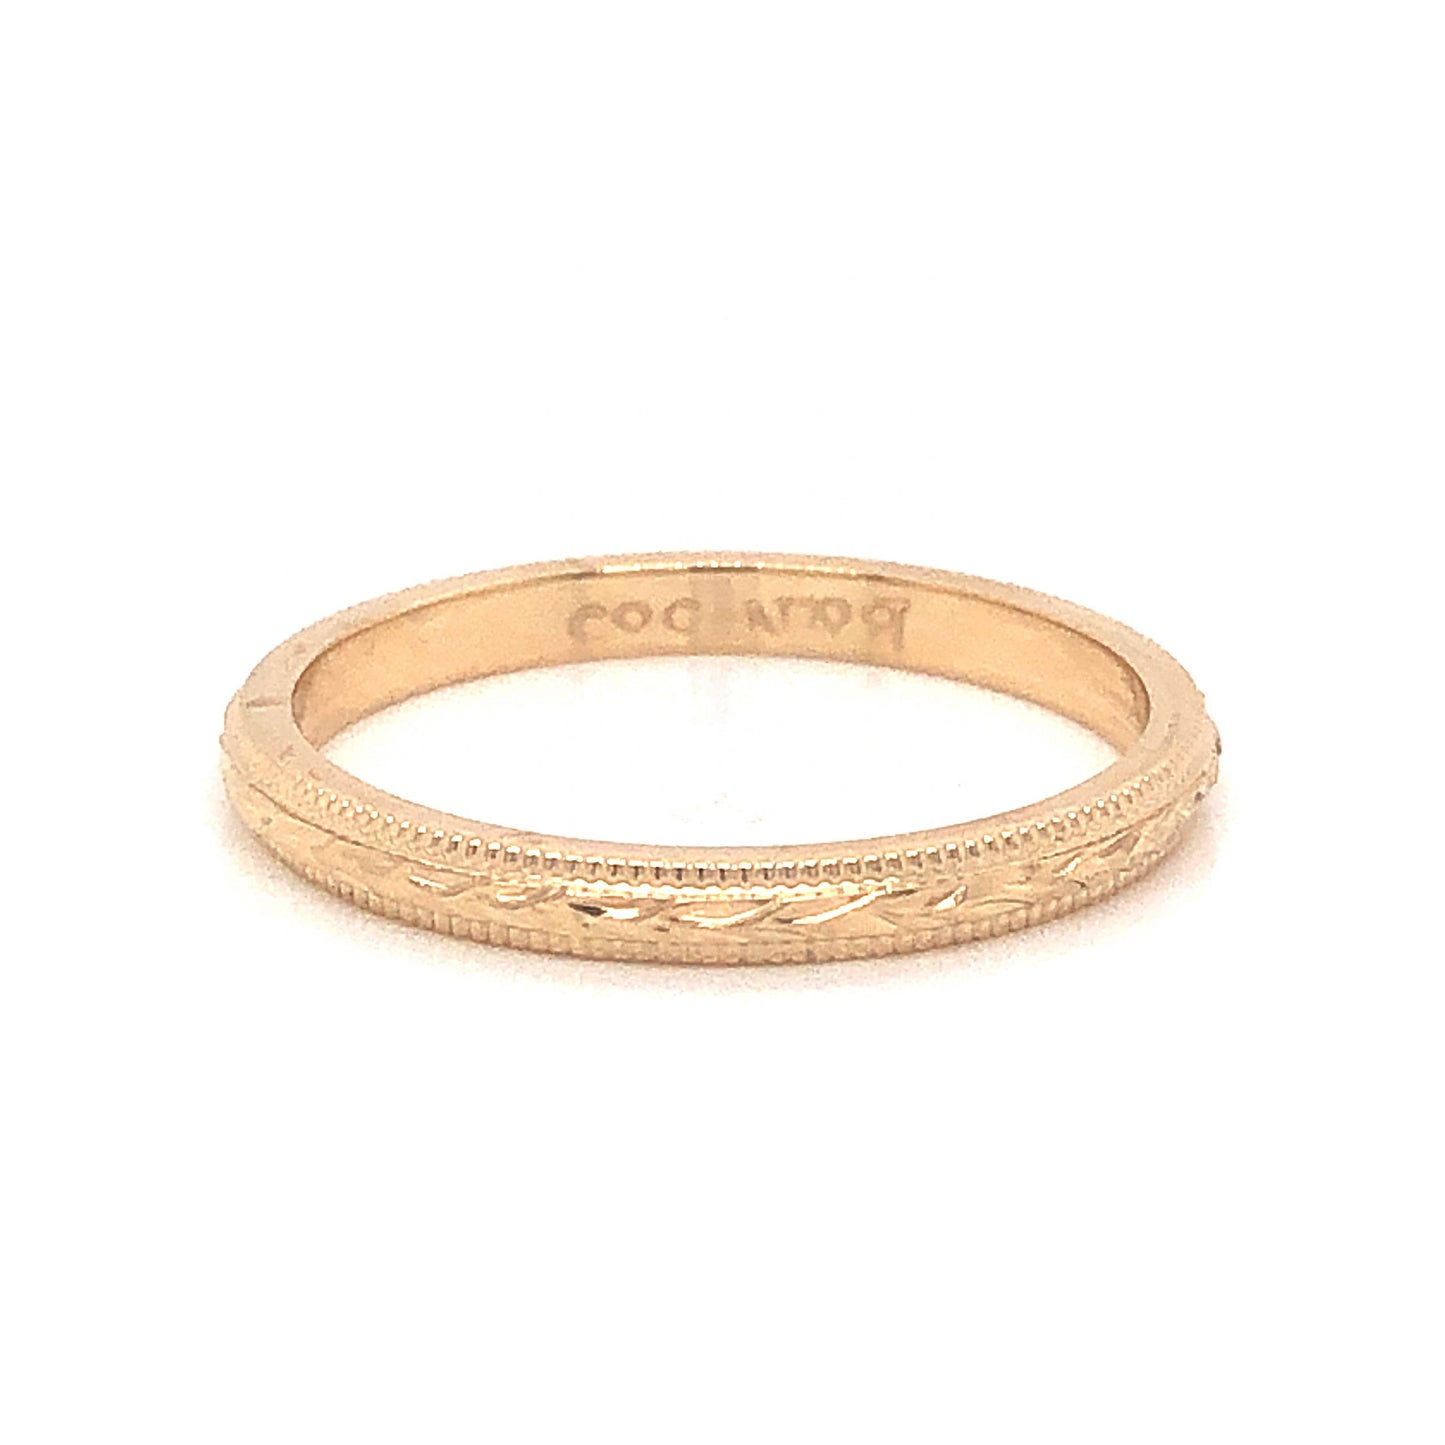 Vintage Inspired Engraved Wedding Band in 14k Yellow Gold